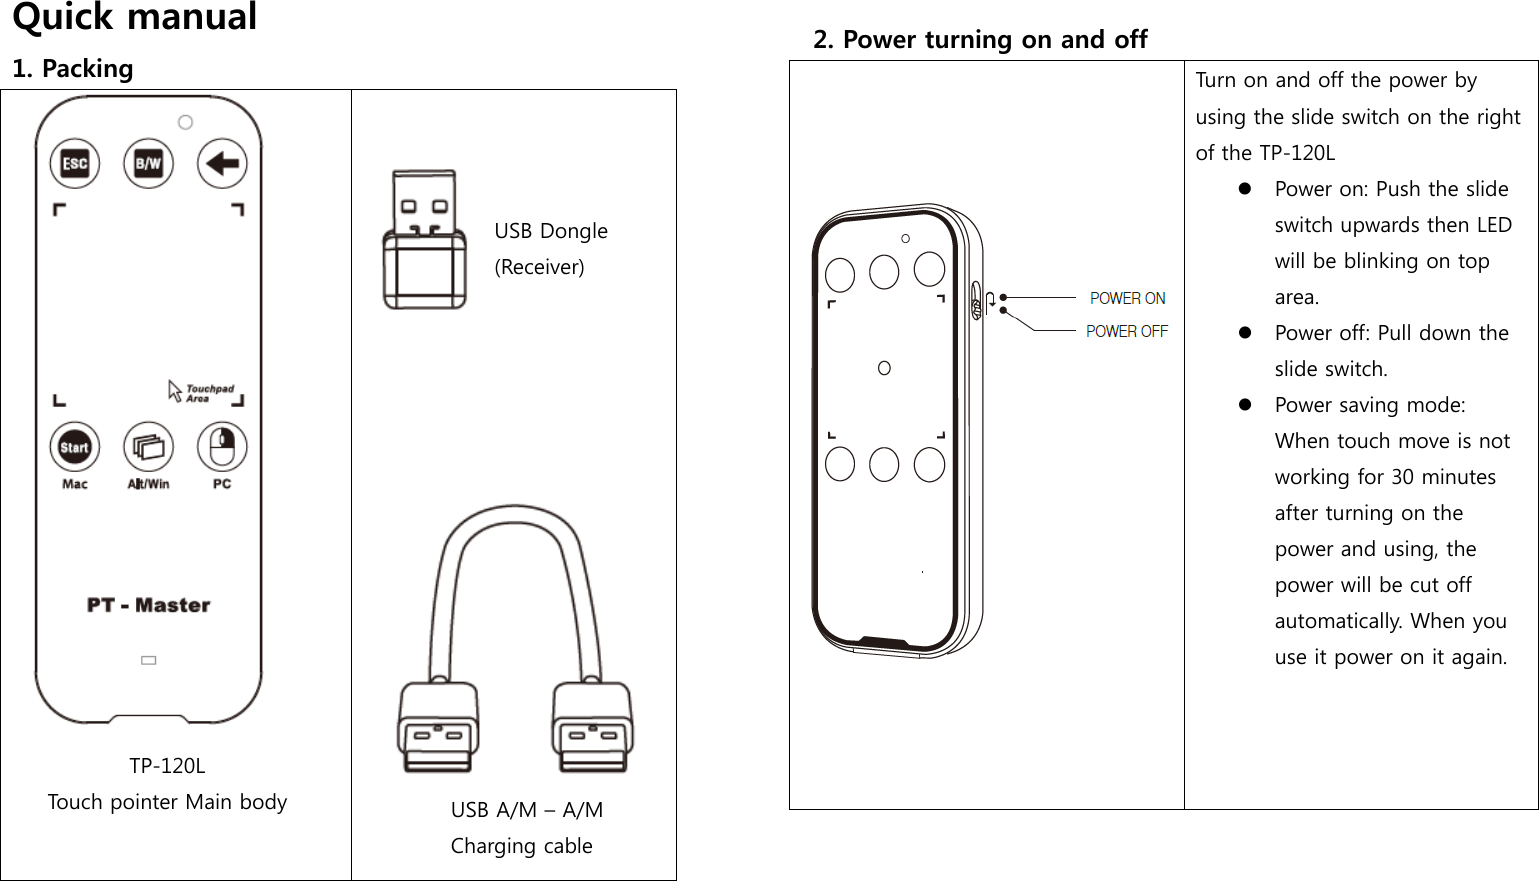 Quick manual 1. Packing                  2. Power turning on and off    Turn on and off the power by using the slide switch on the right of the TP-120L  Power on: Push the slide switch upwards then LED will be blinking on top area.  Power off: Pull down the slide switch.  Power saving mode: When touch move is not working for 30 minutes after turning on the power and using, the power will be cut off automatically. When you use it power on it again.  USB Dongle (Receiver) USB A/M – A/M Charging cable TP-120L Touch pointer Main body 